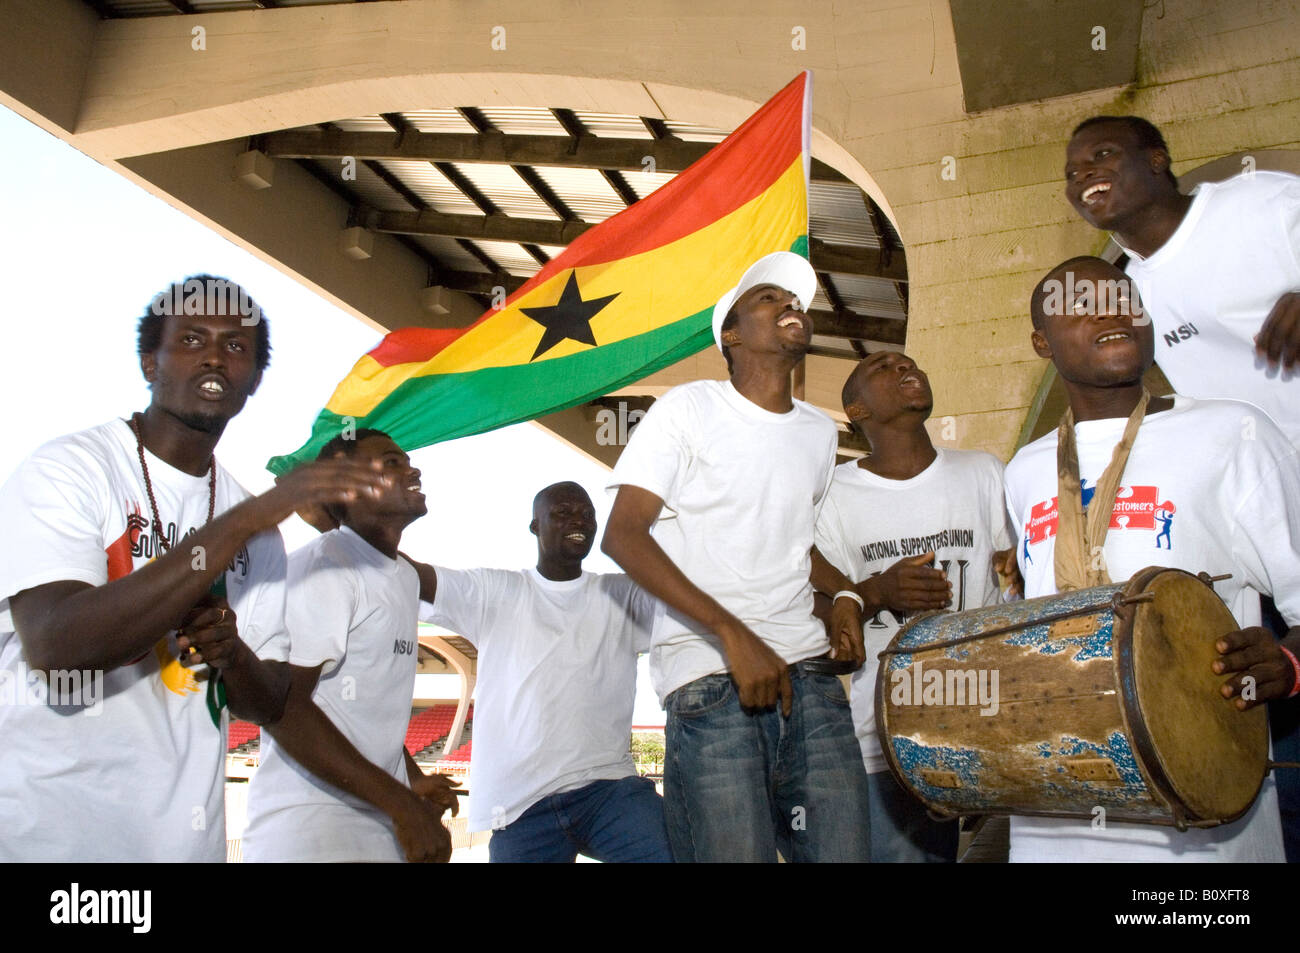 A group of supporters of Ghana s youth sports association celebrating waving the national flag of Ghana, Accra Stock Photo